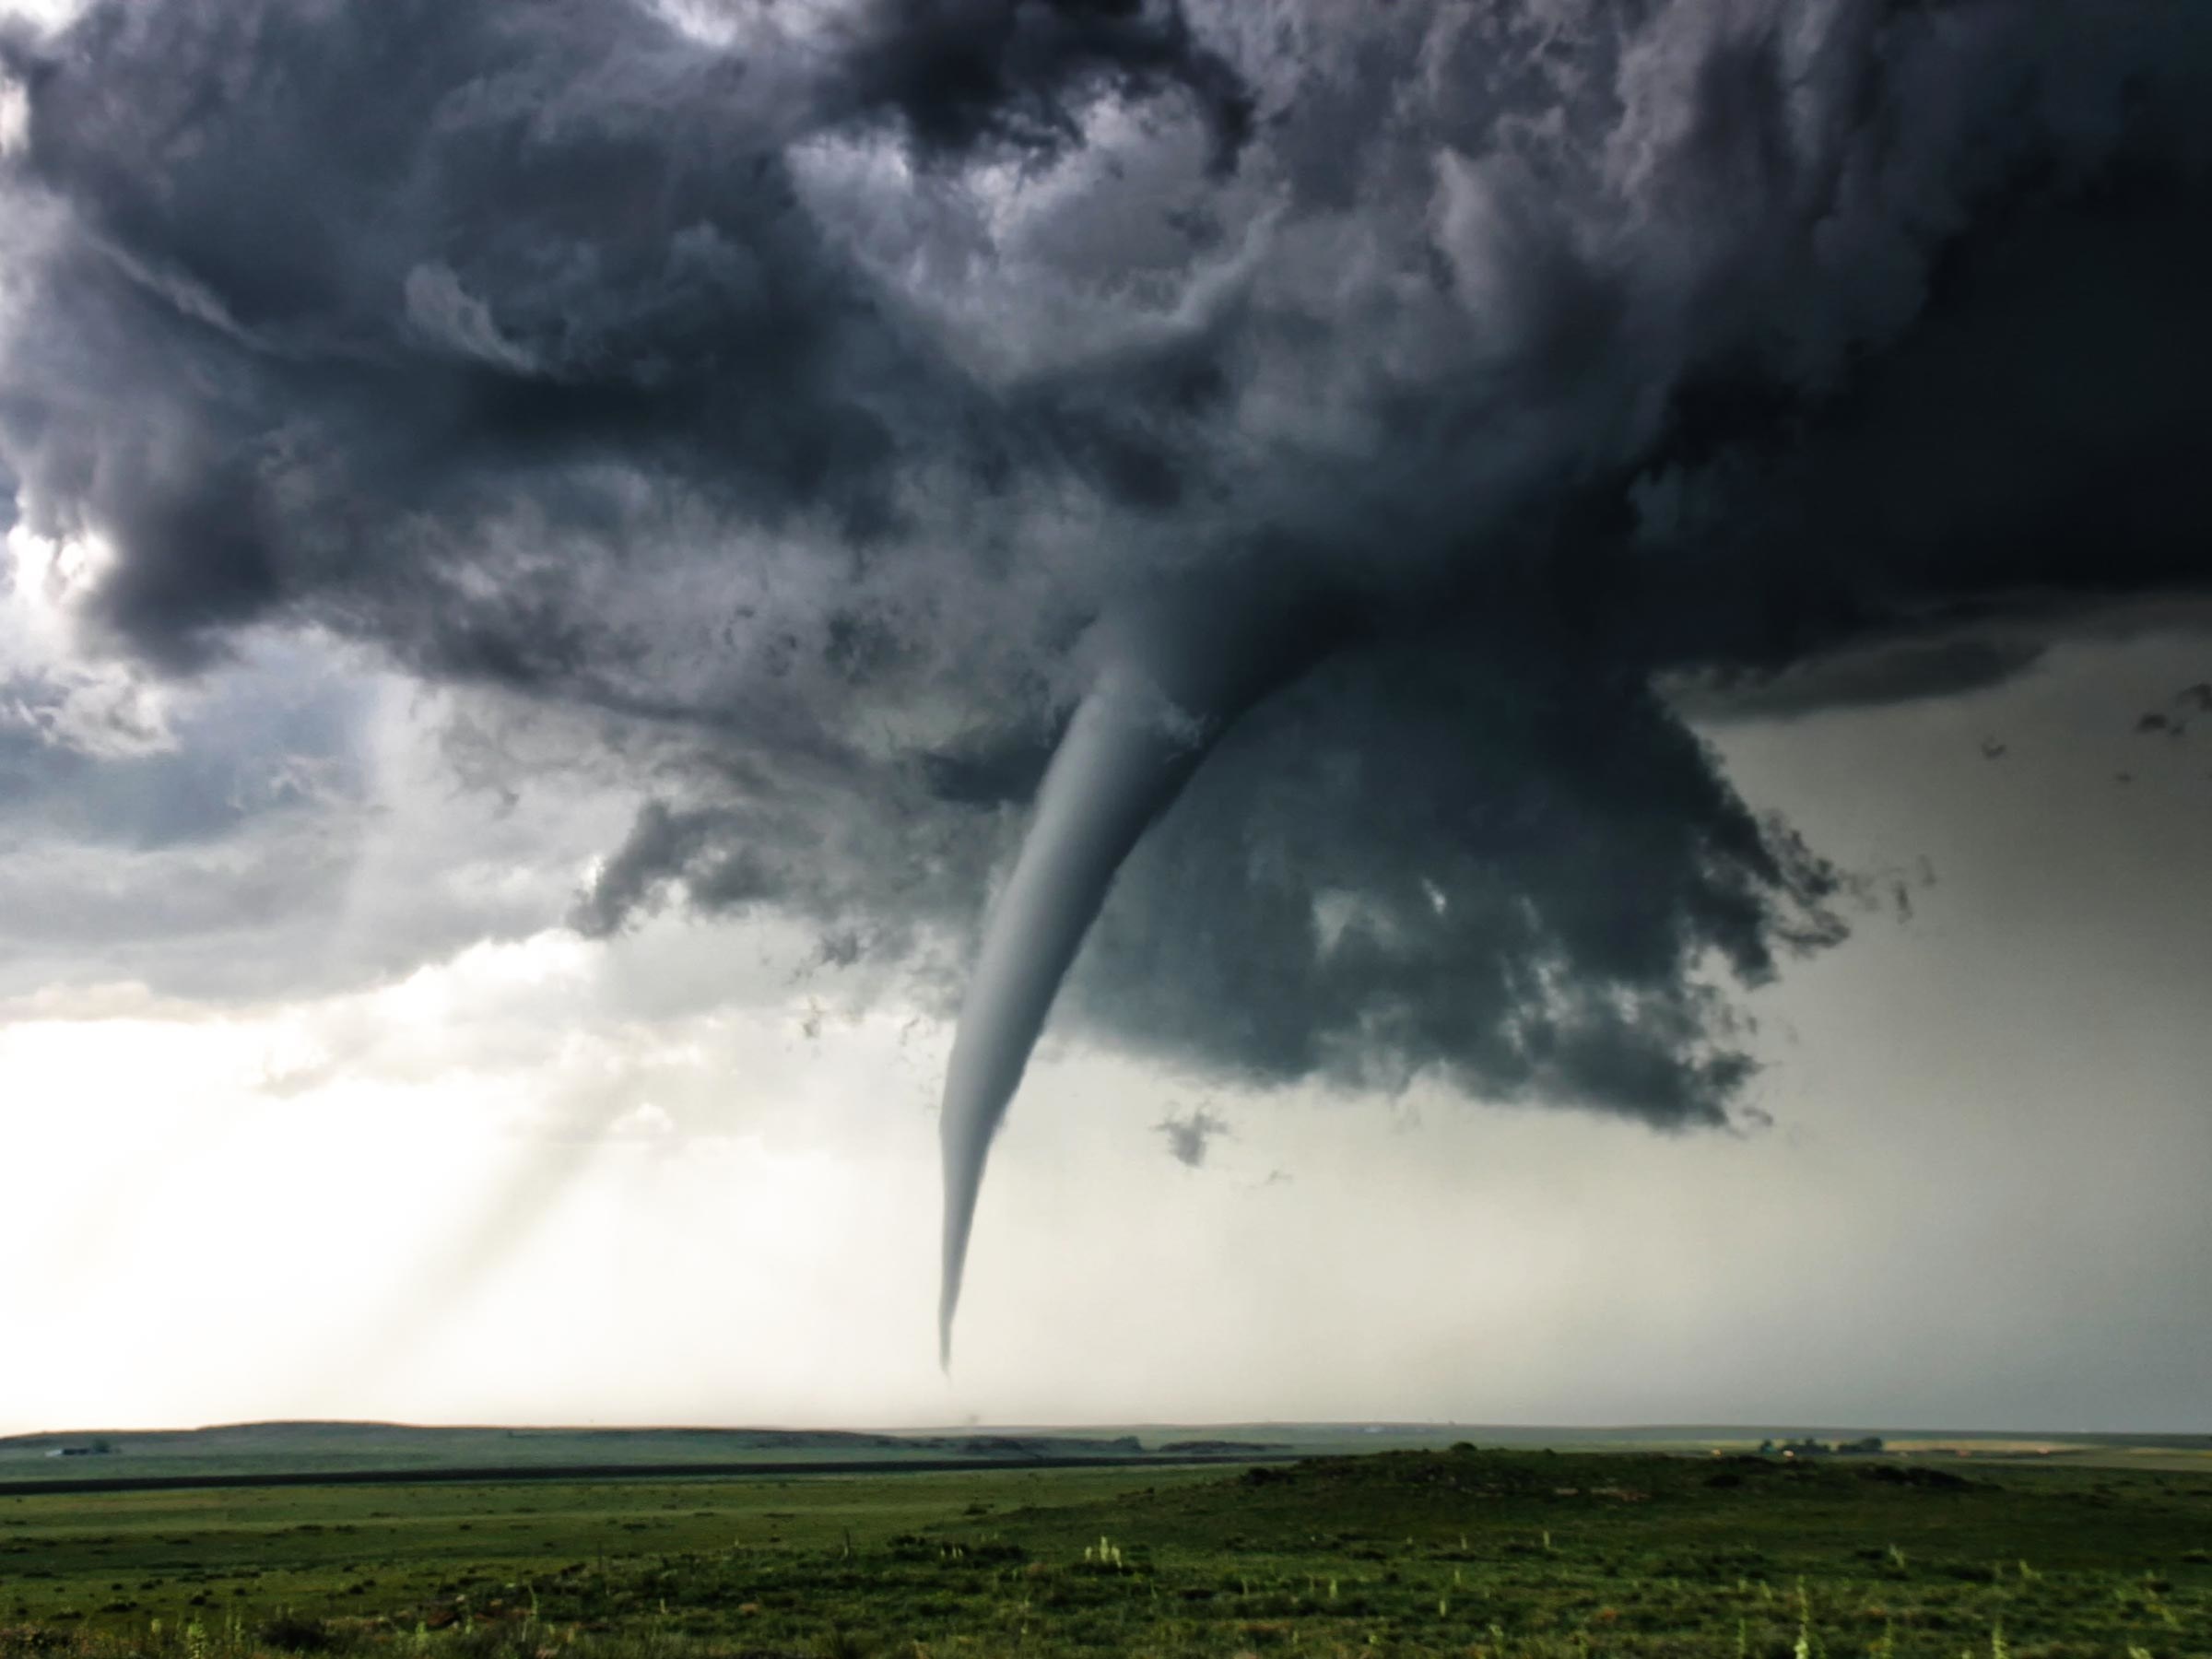 I have lilapsophobia: a severe fear of tornadoes or hurricanes.